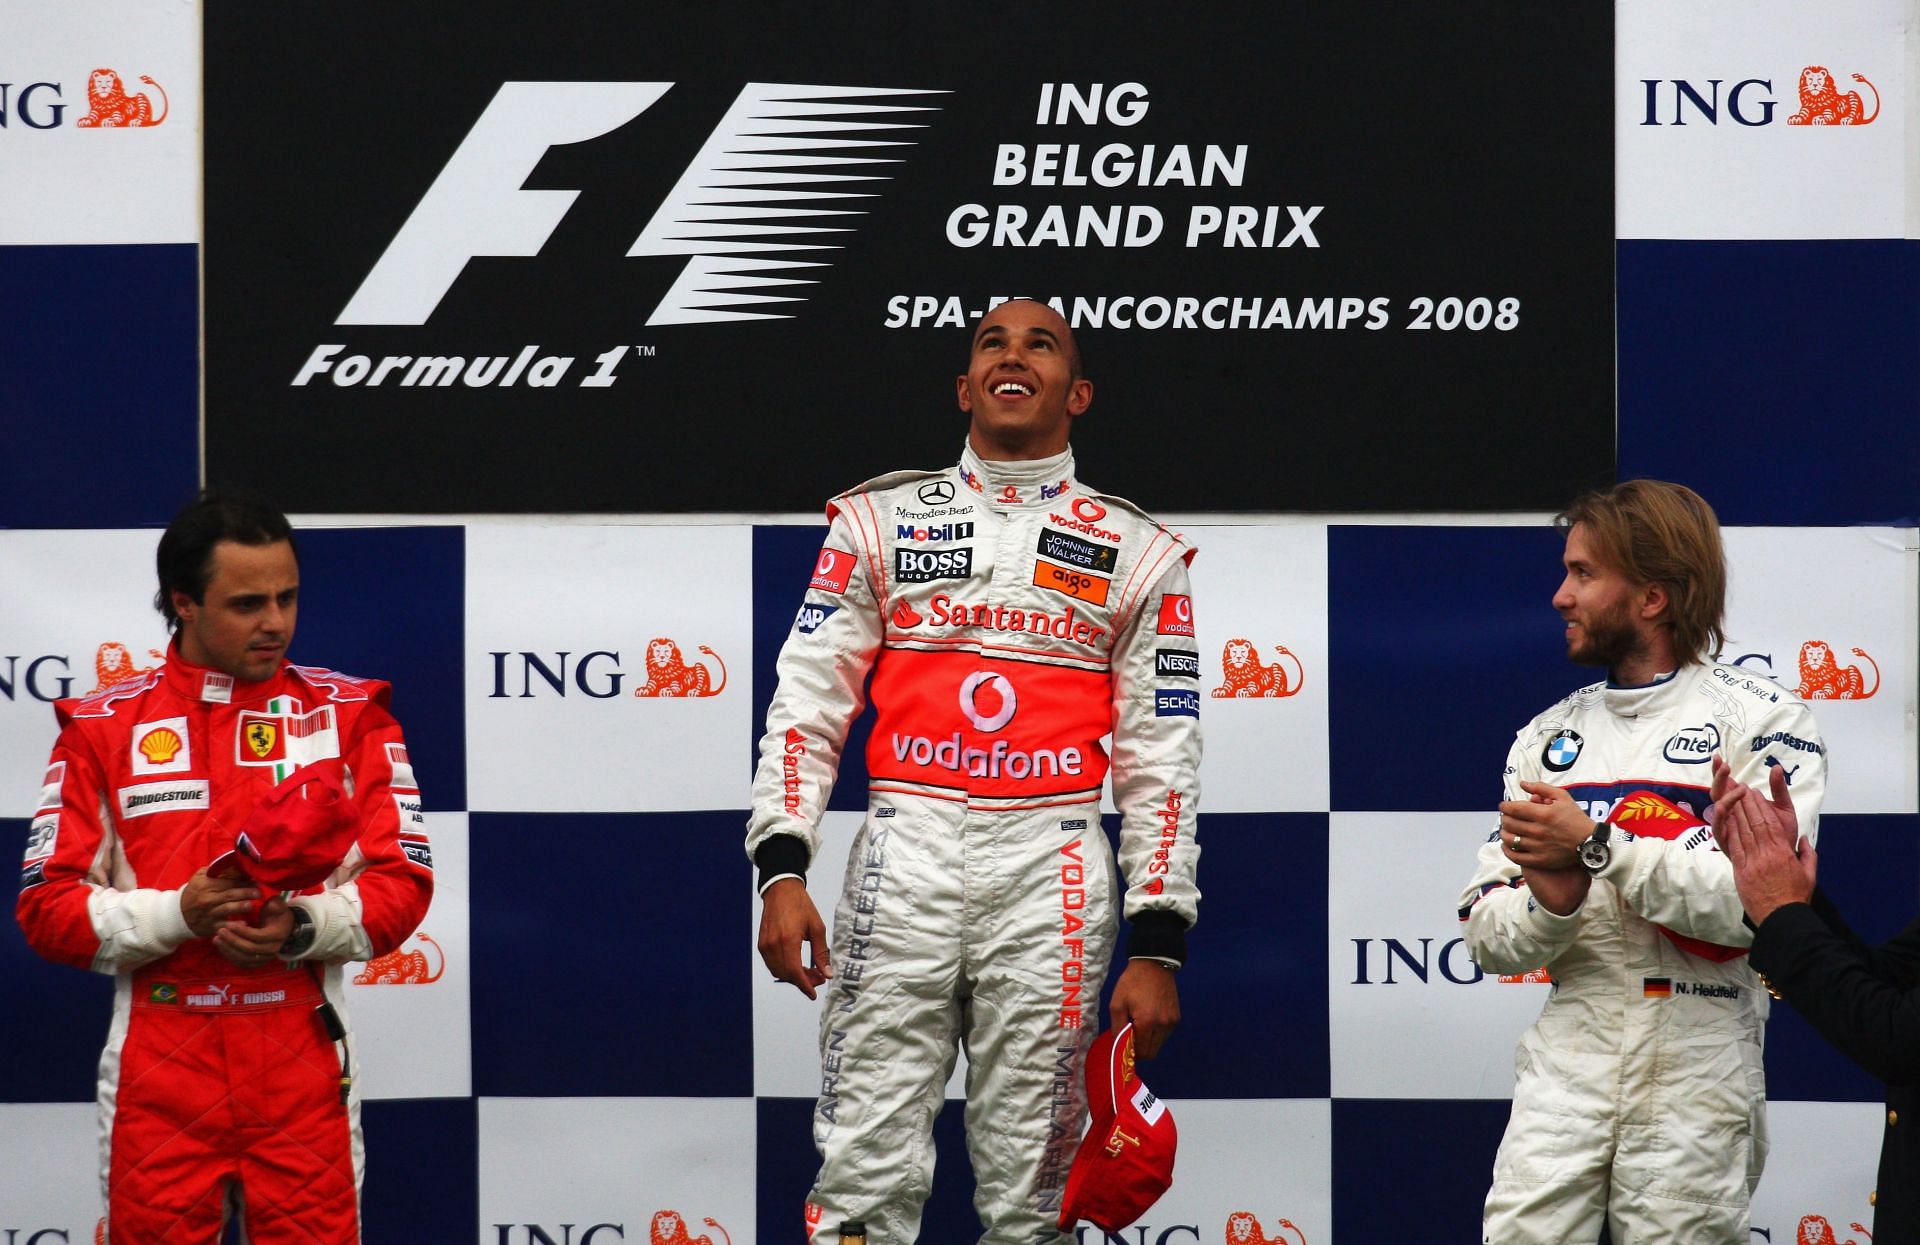 F1 Grand Prix of Belgium &mdash; Lewis Hamilton celebrates his victory before being penalized by the FIA